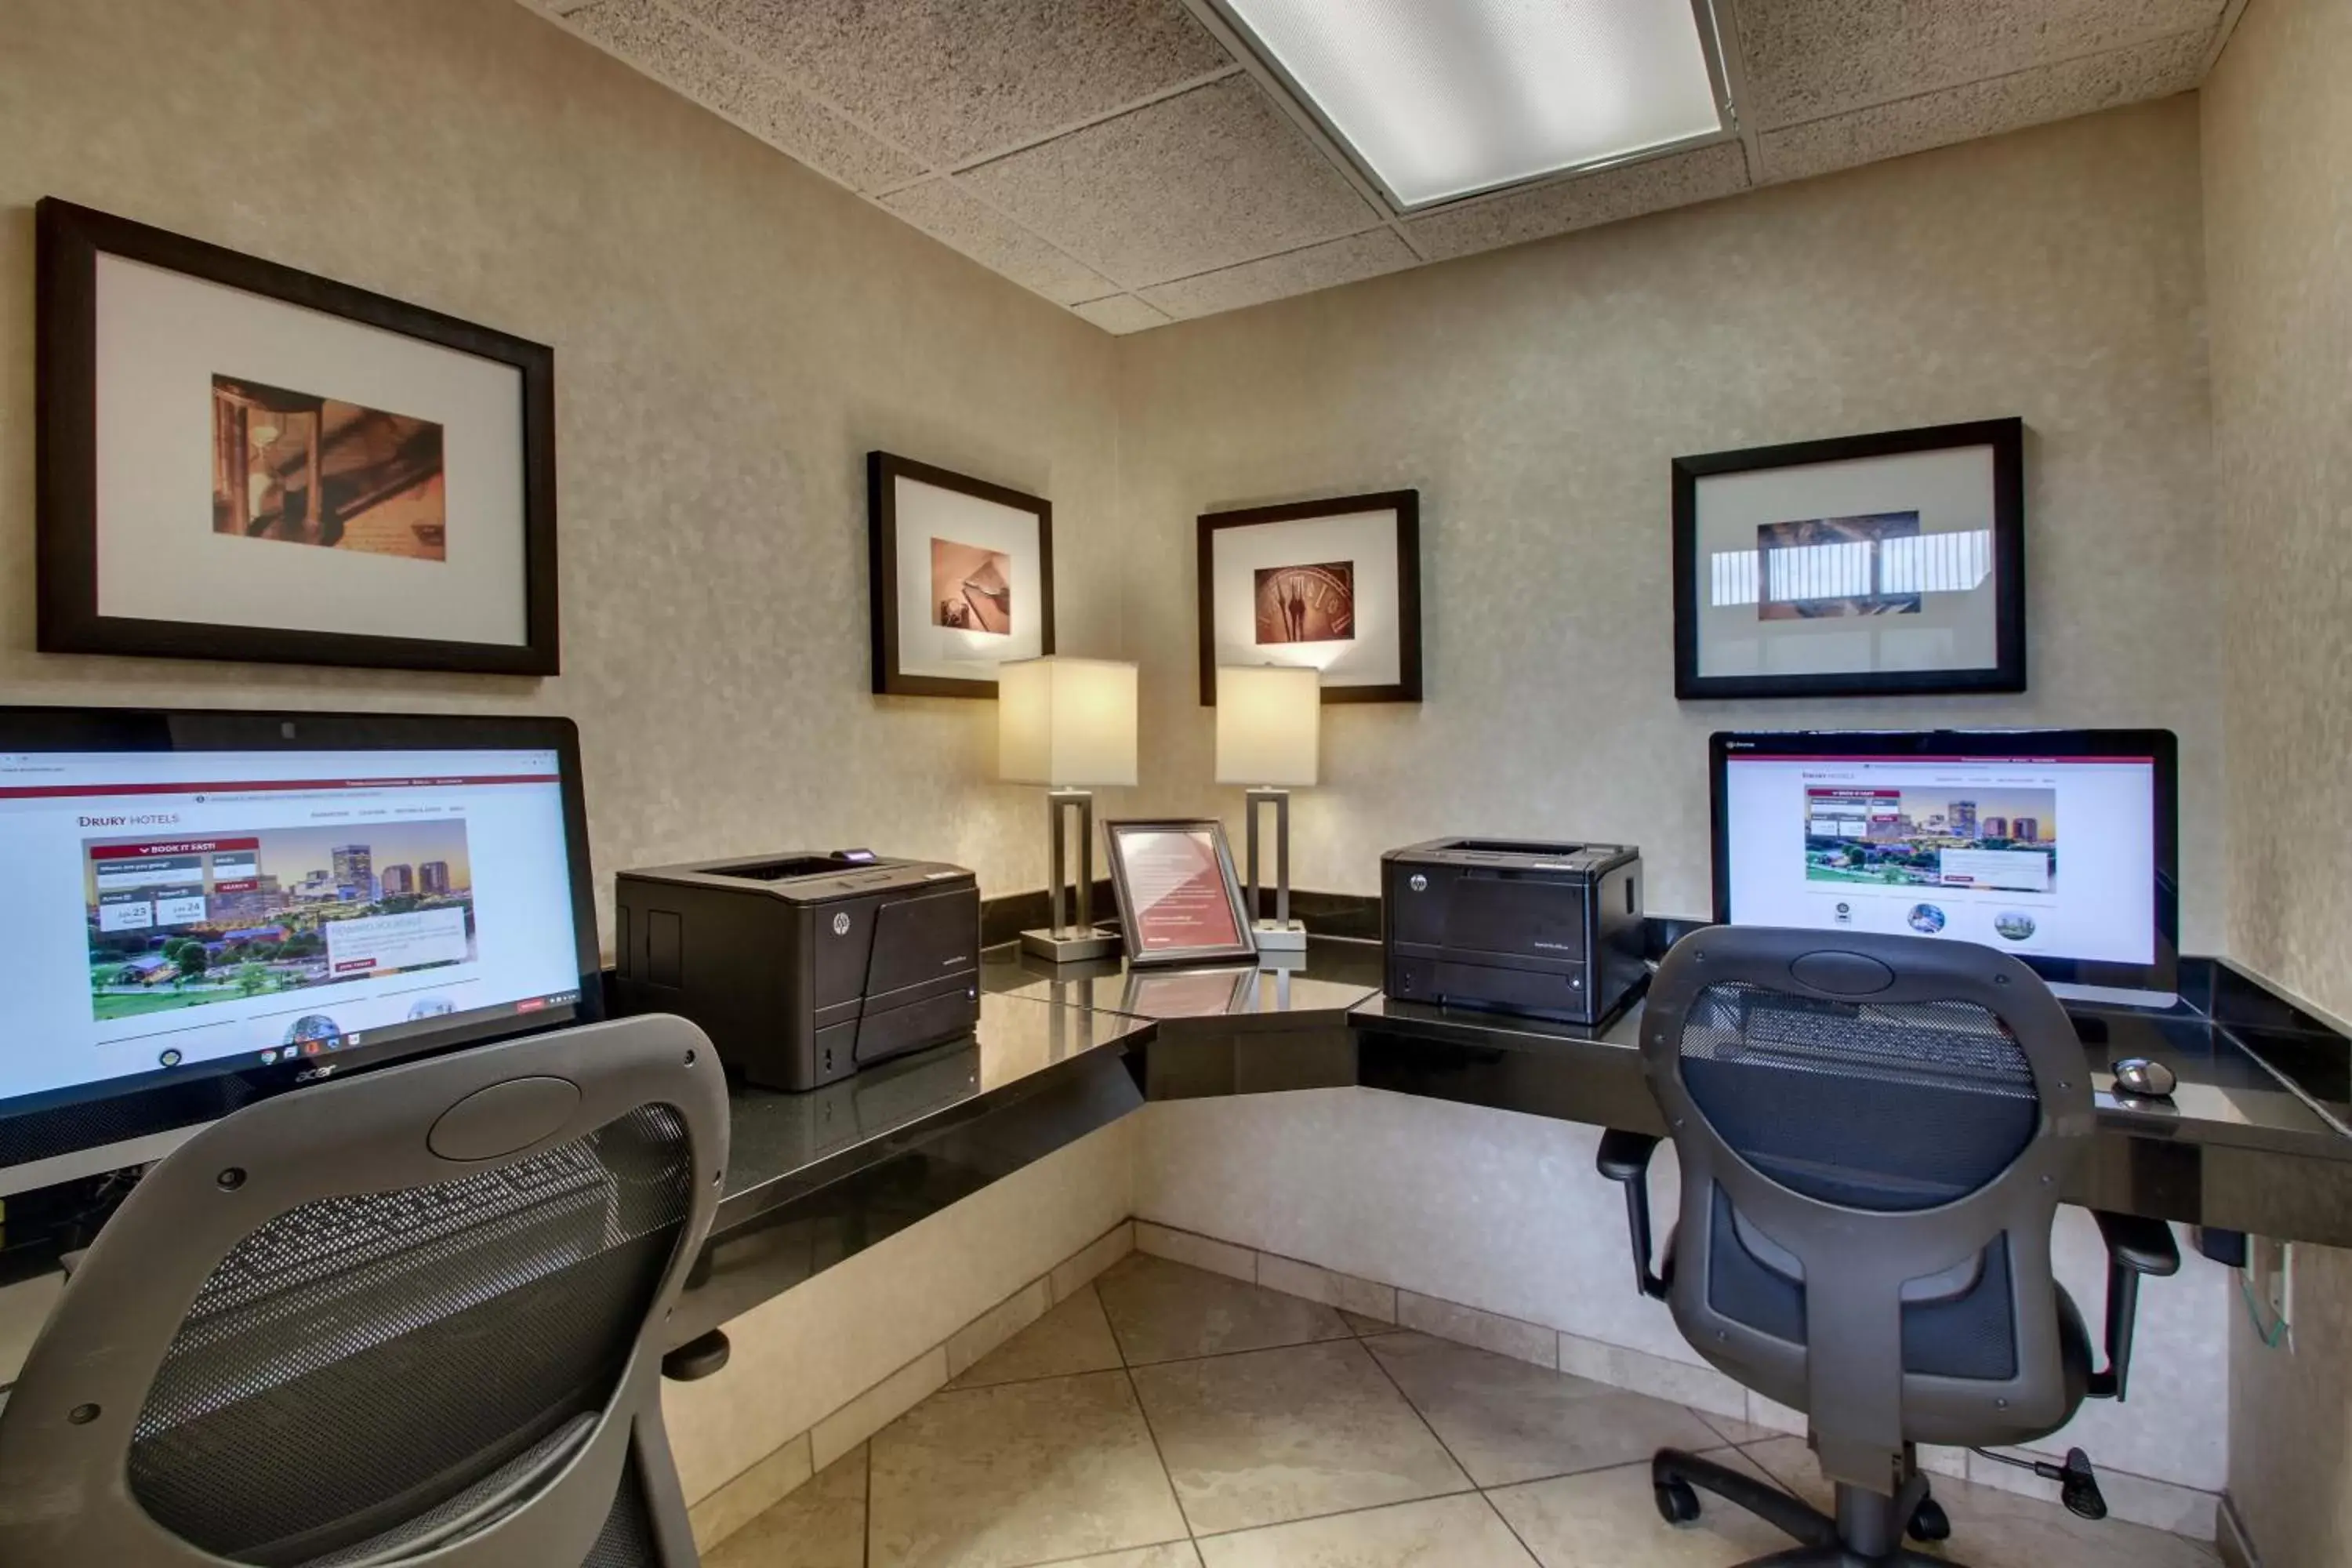 Business facilities in GreenTree Hotel - Houston Hobby Airport